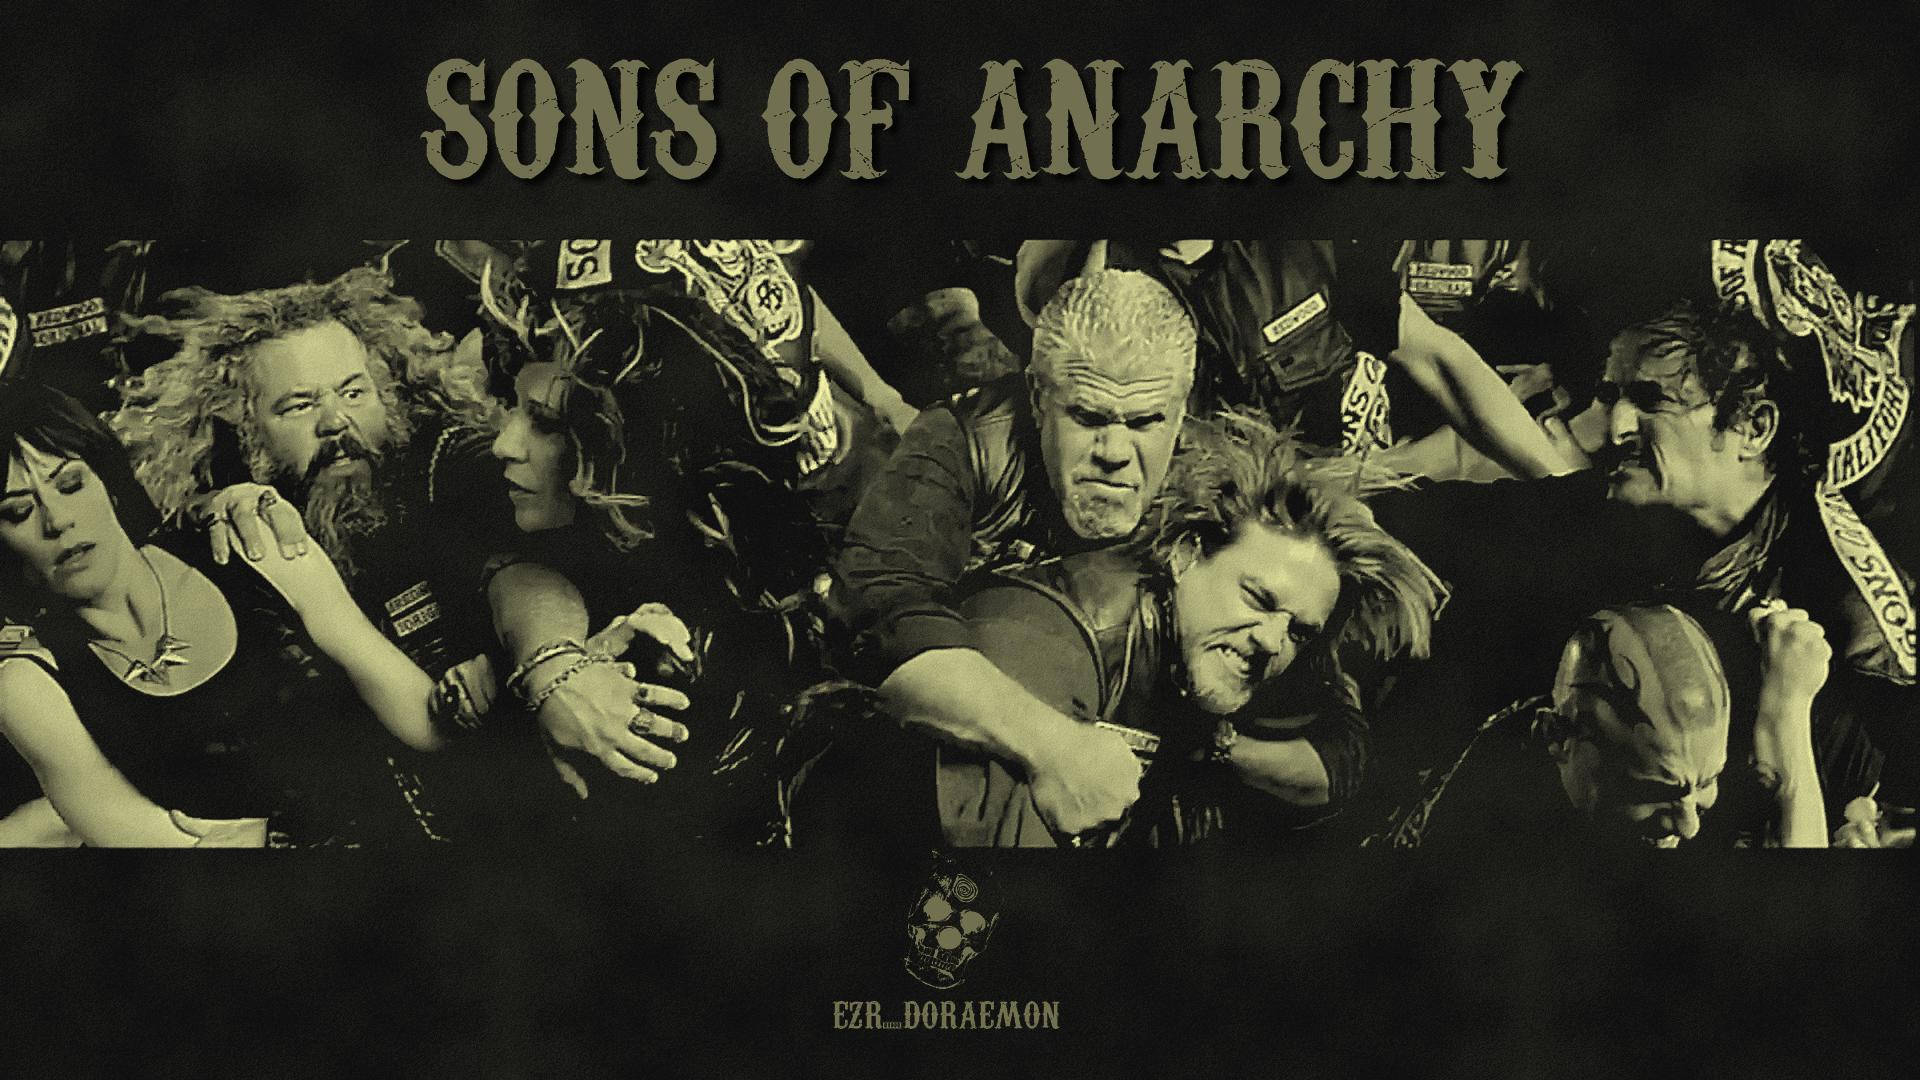 The Cast Of Sons Of Anarchy In All Its Glory Background